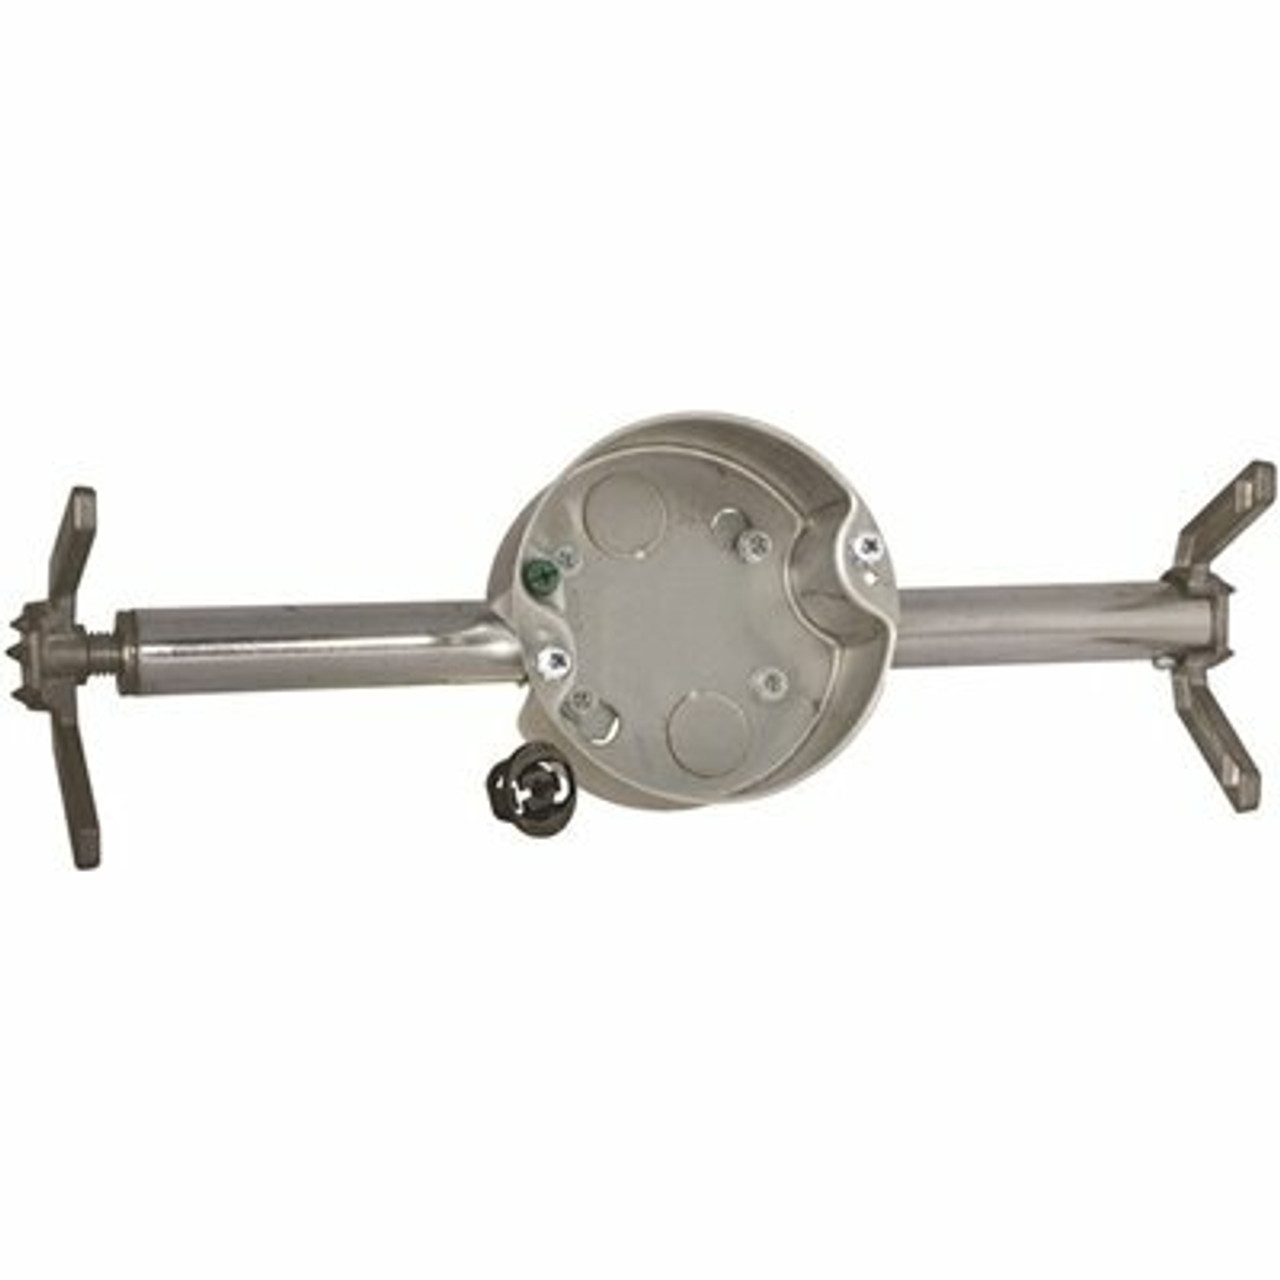 Raco Retro-Brace With 4 In. Round Ceiling Rated Pan, 1-1/2 In. Deep With 1/2 In. Ko's